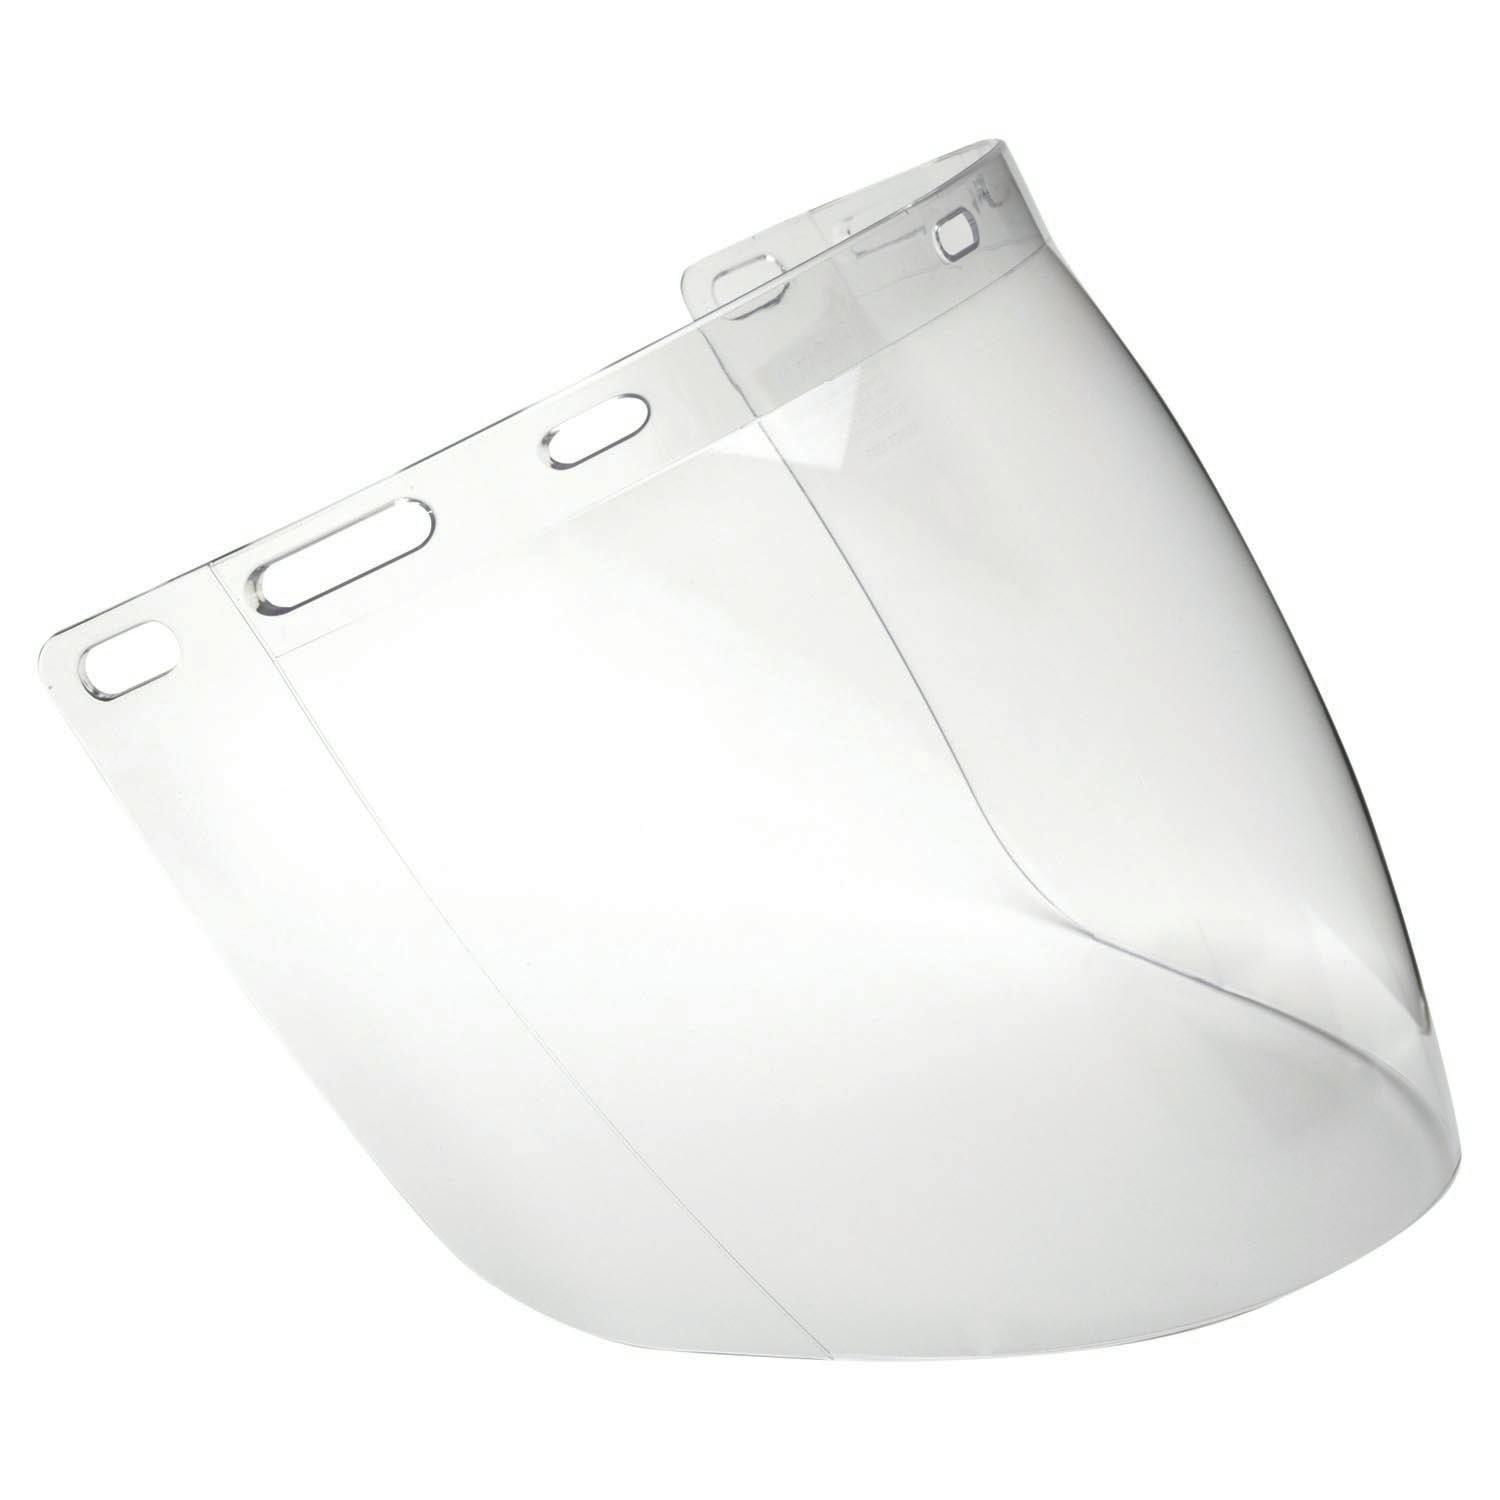 Pro Choice Economy Visor To Suit Pro Choice Safety Gear Browguards (Bg & Hhbge) Clear Lens (Non Anti-Fog)